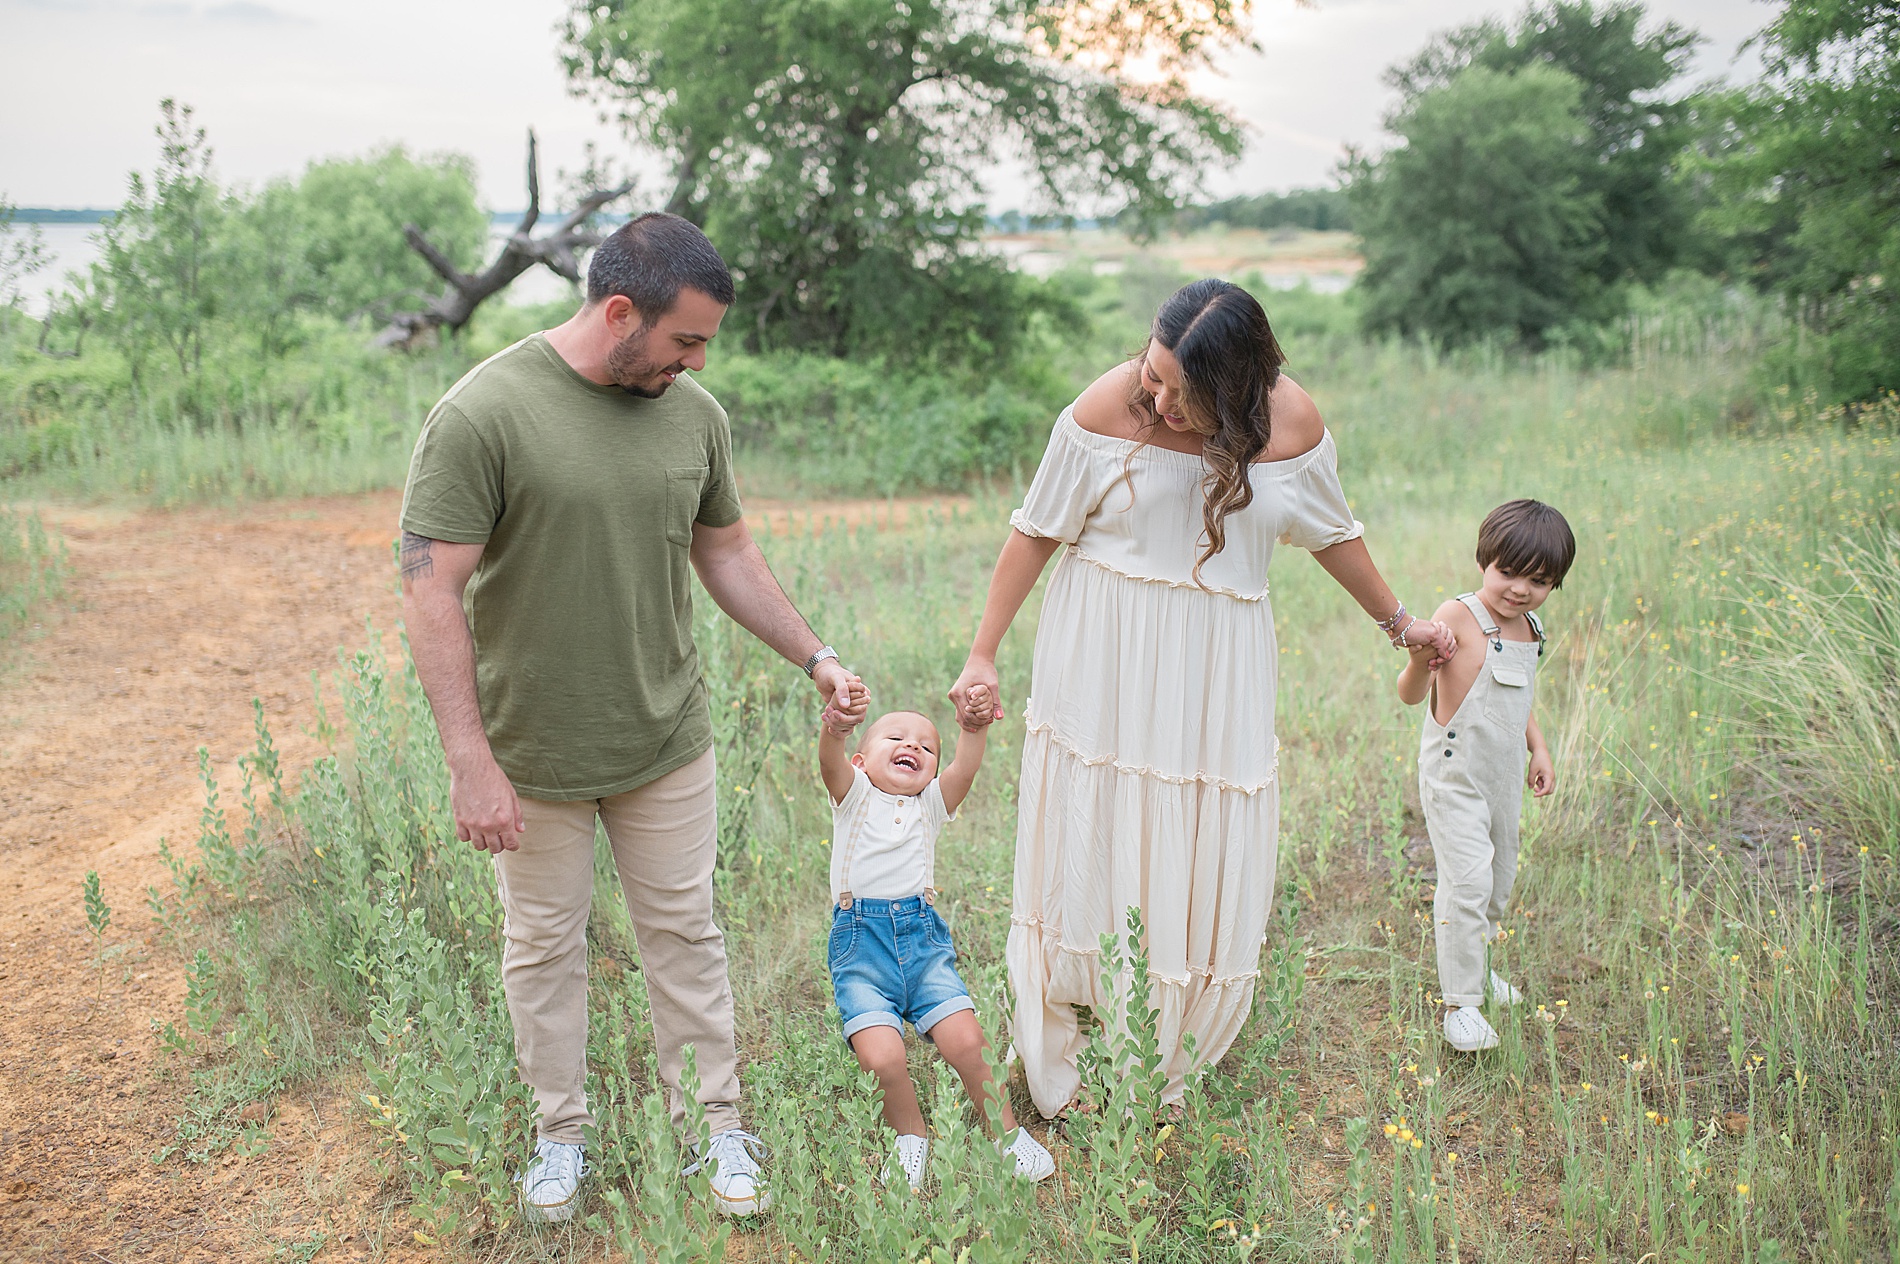 family of four at Murrell Park | Top 11 Dallas-Fort Worth Picture Locations photographed by Lindsey Dutton Photography, a Dallas Family photographer
